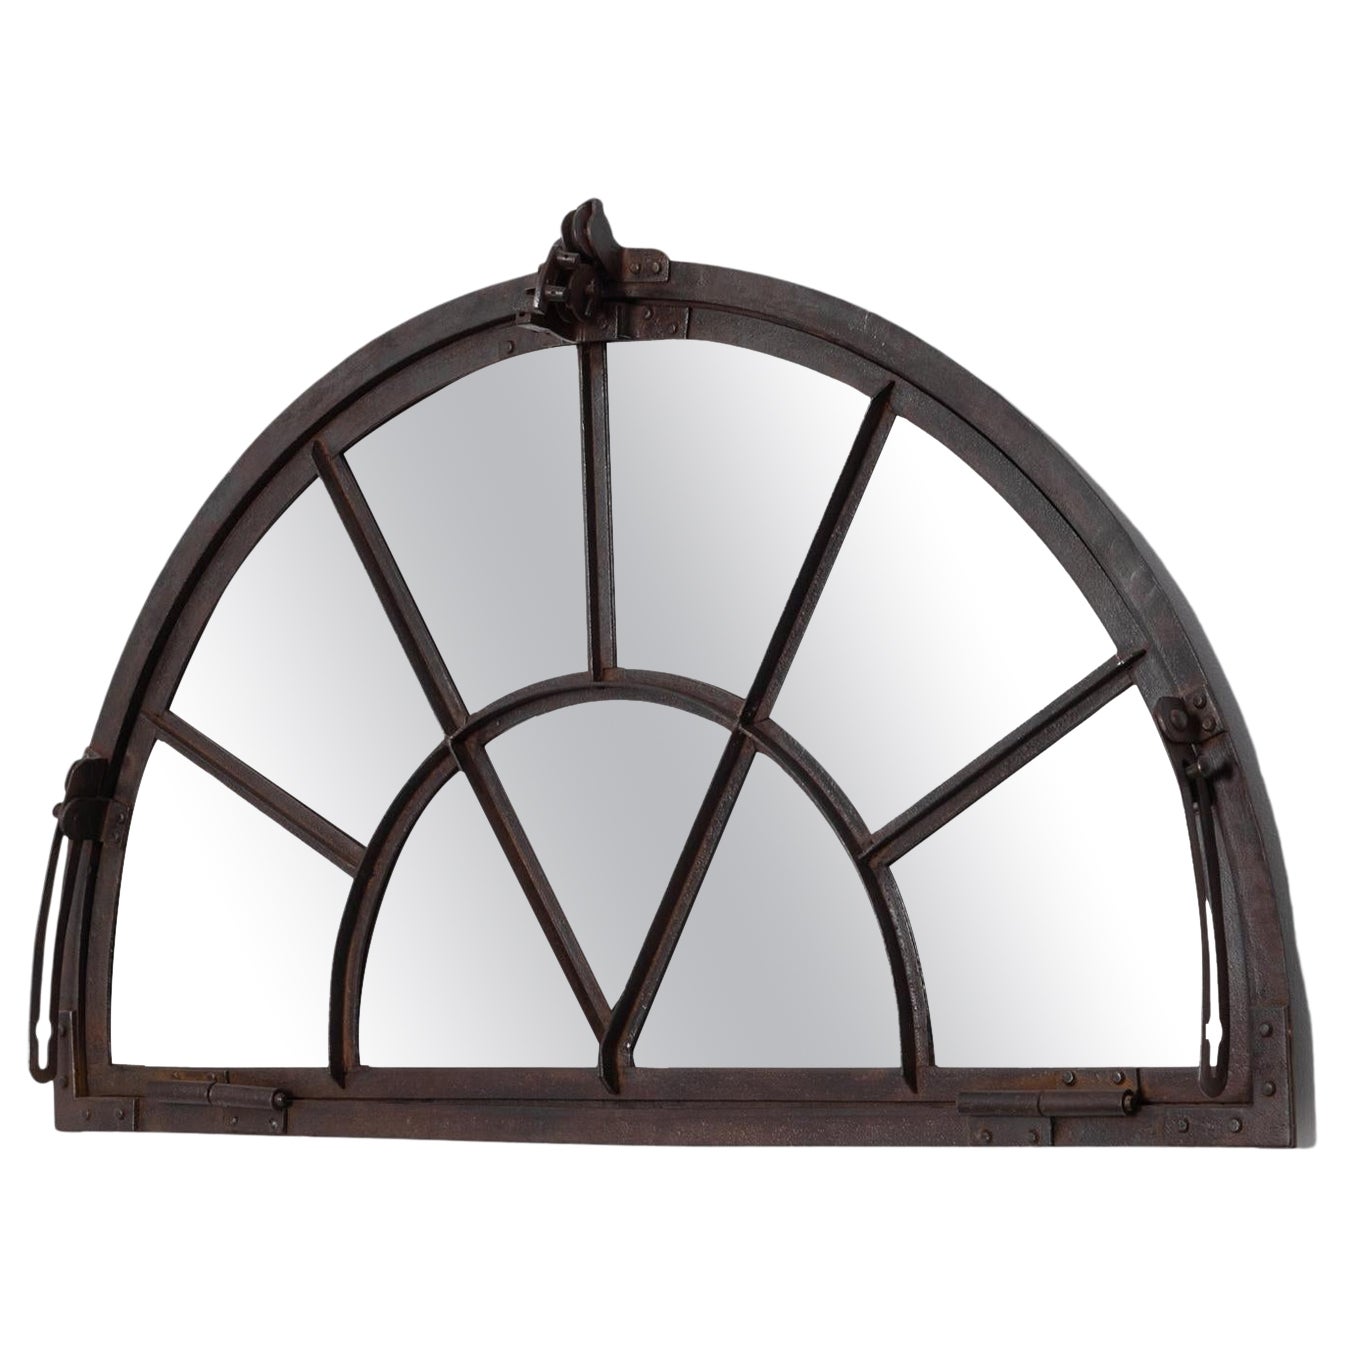 1900s French Iron Mirrored Window For Sale